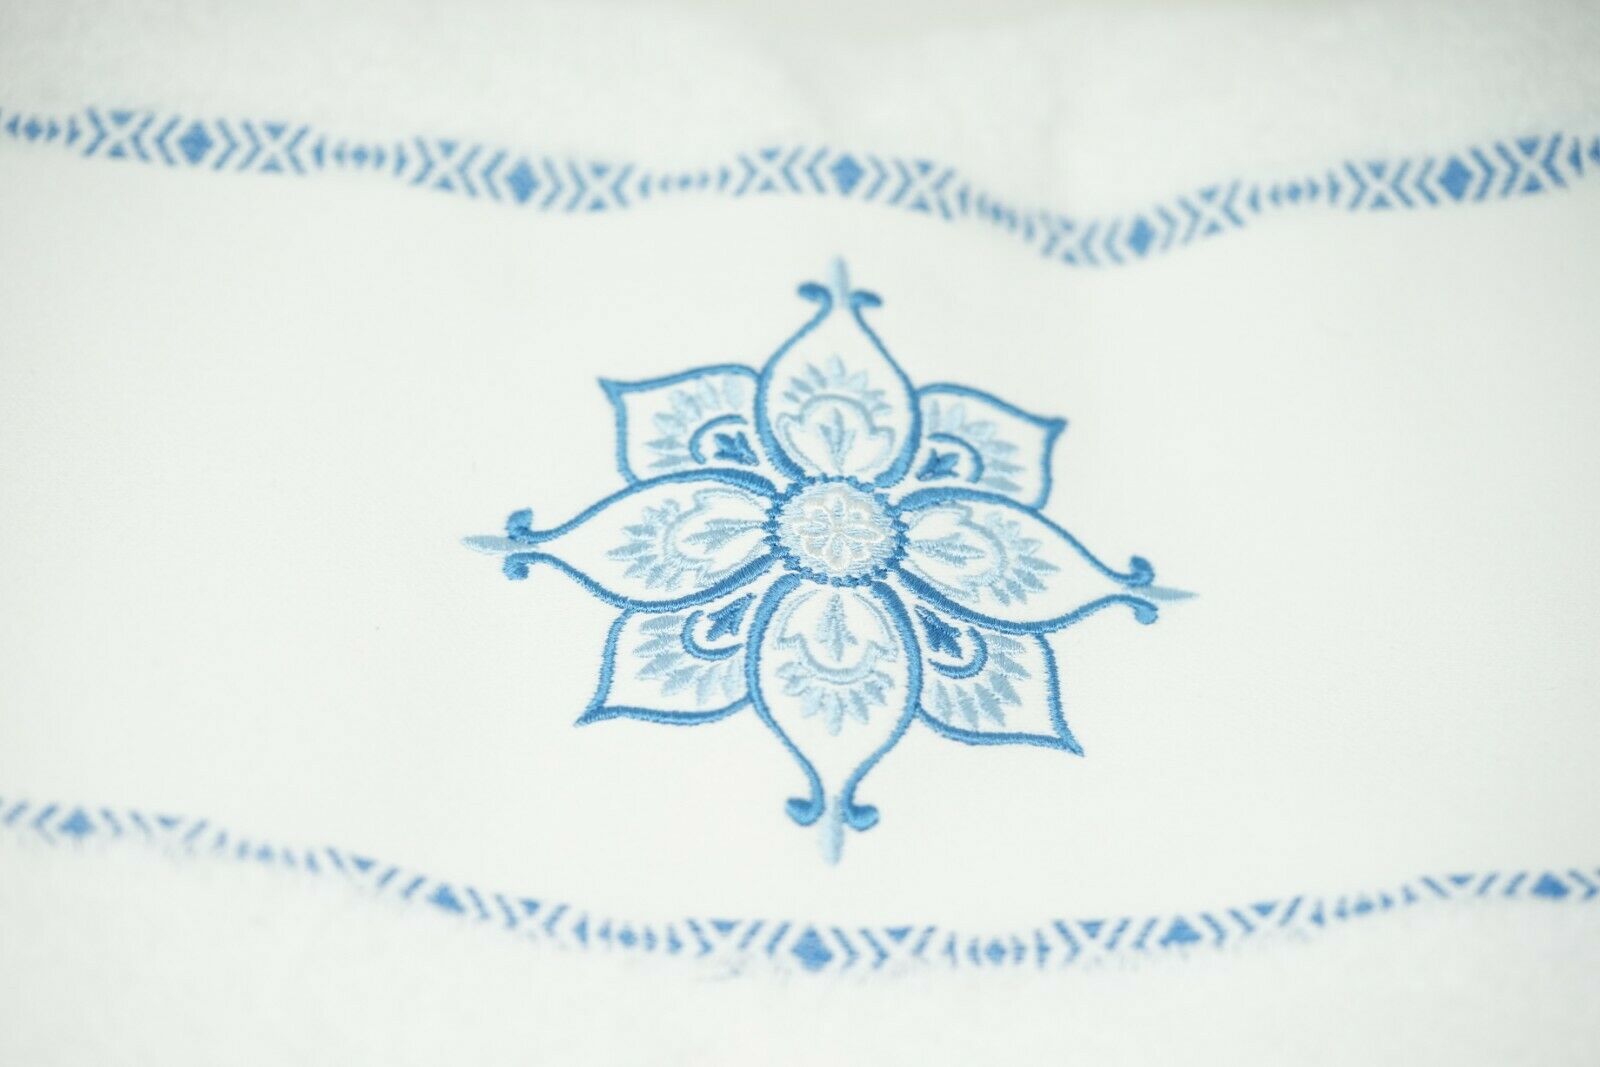 Avanti Portico 100% Cotton Made in Turkey Flower Bath Towel with Tassels - White - image 3 of 3